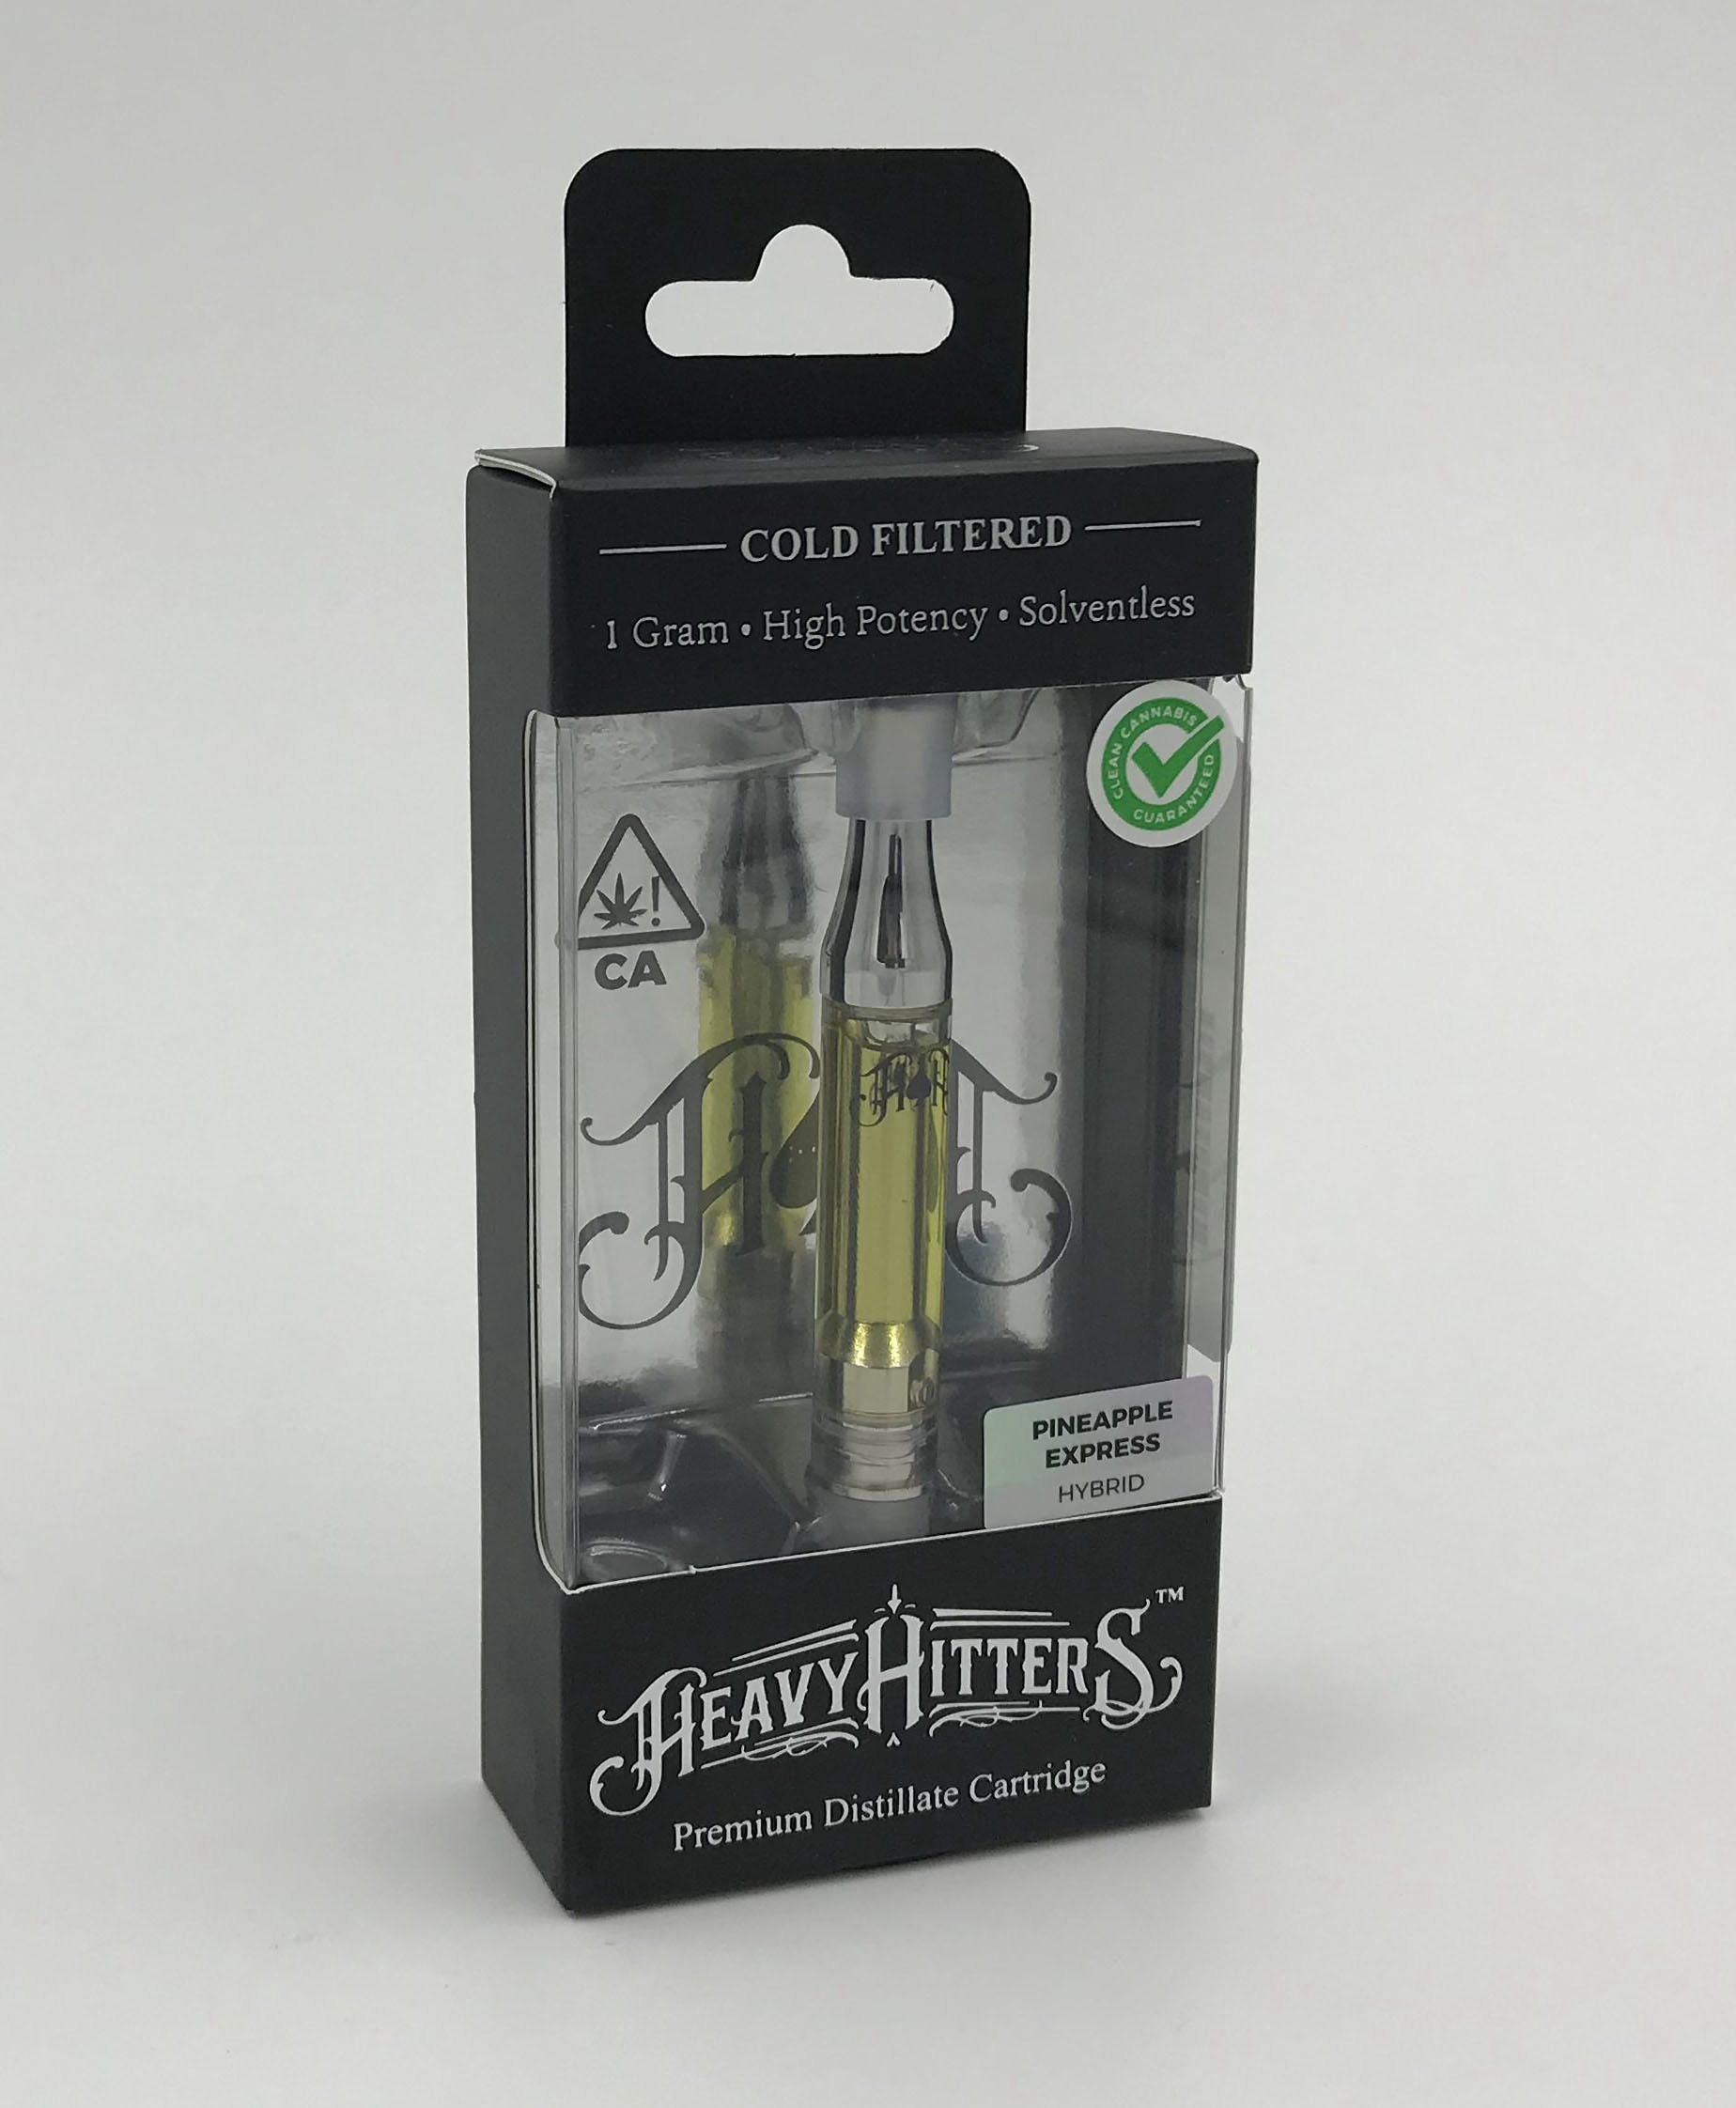 concentrate-heavy-hitters-pineapple-express-cartridges-by-heavy-hitters